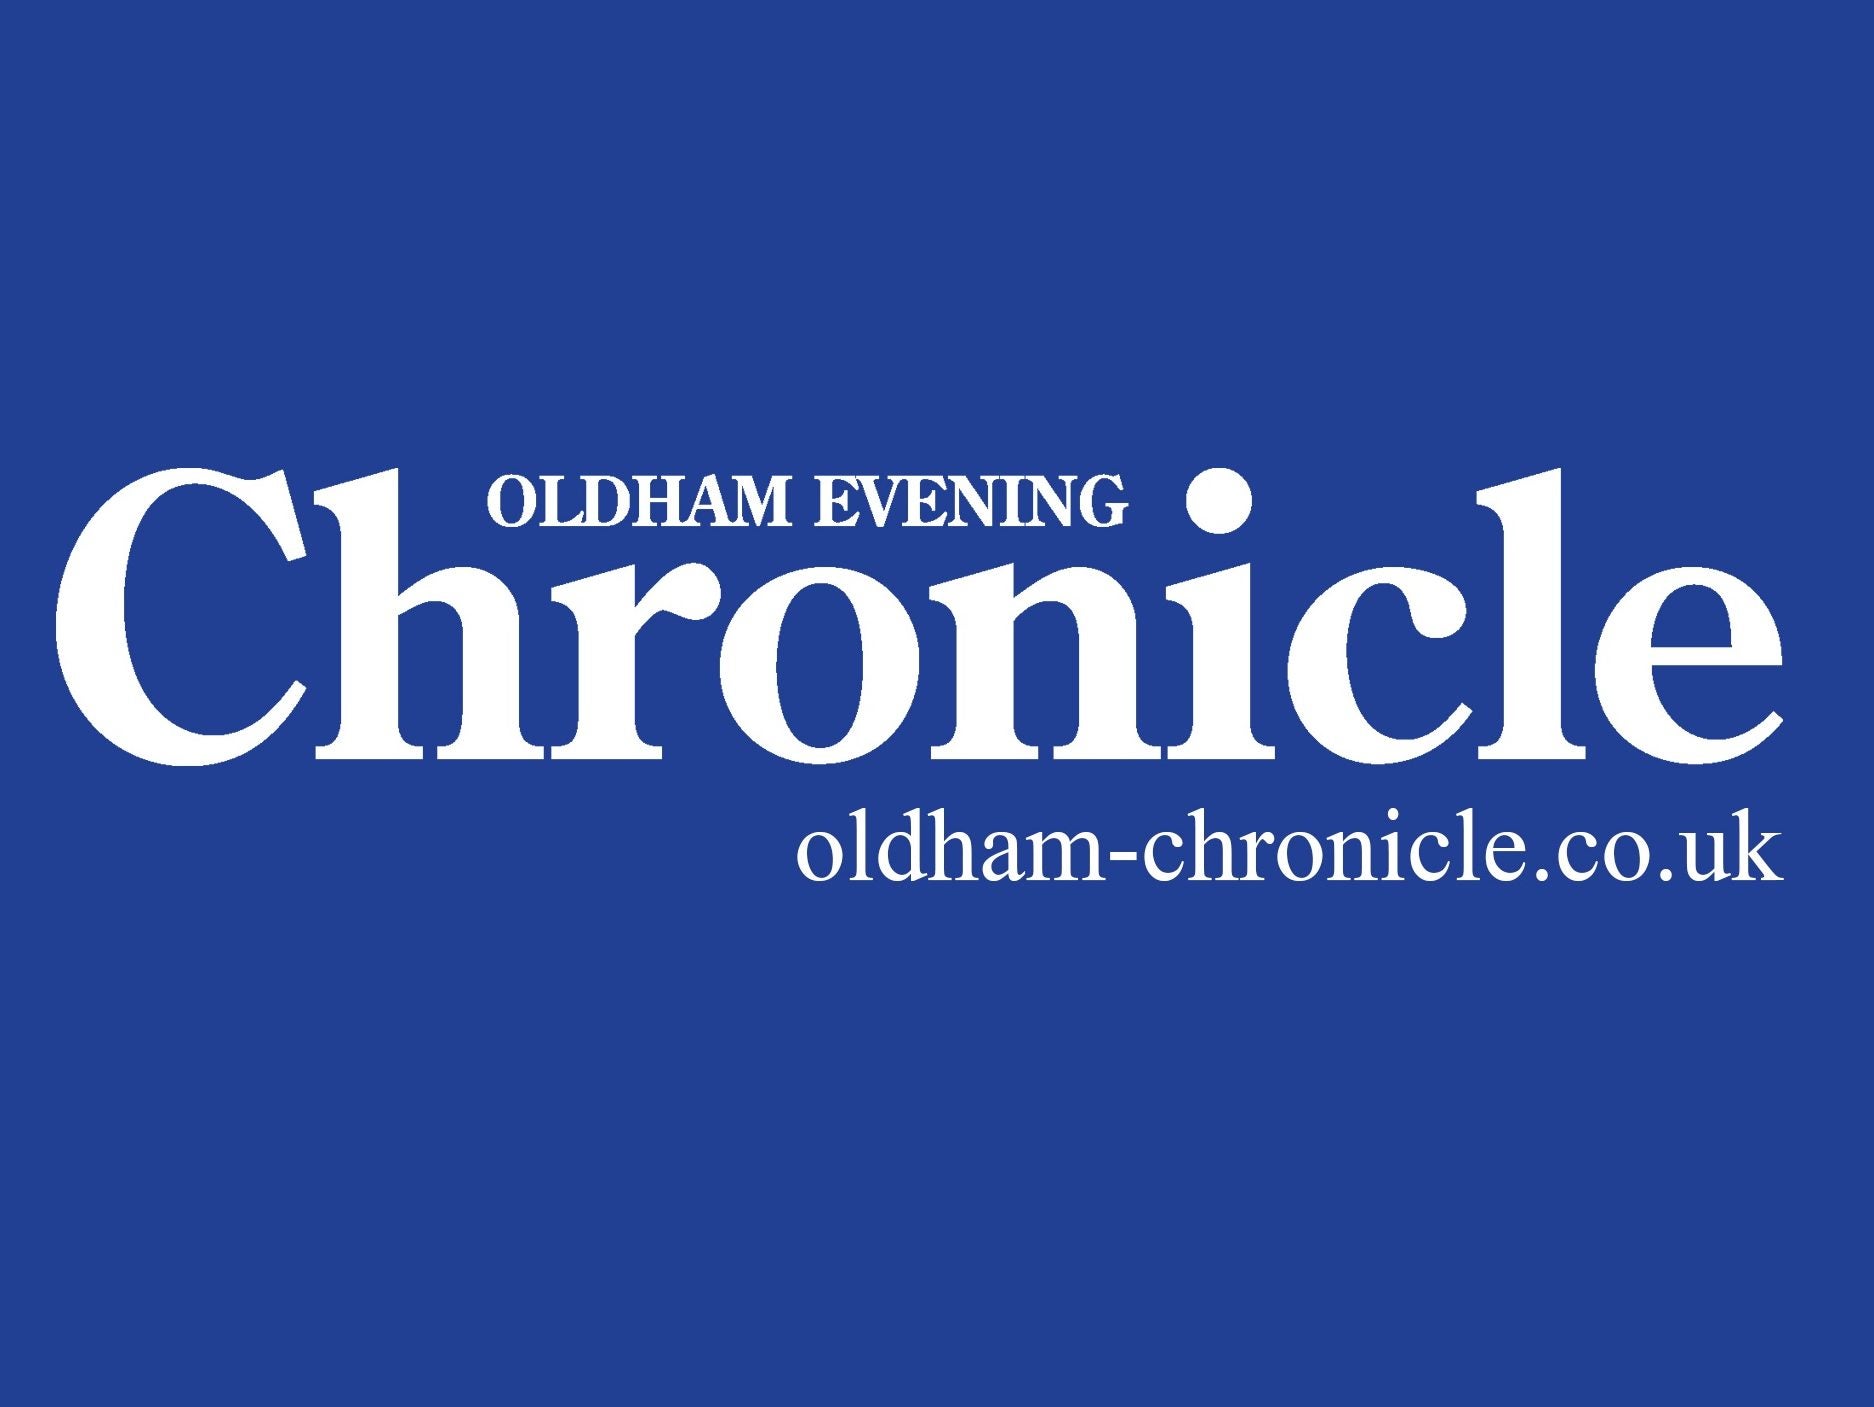 New Oldham Chronicle website to go live on Valentine's Day with former staffer leading breaking news coverage